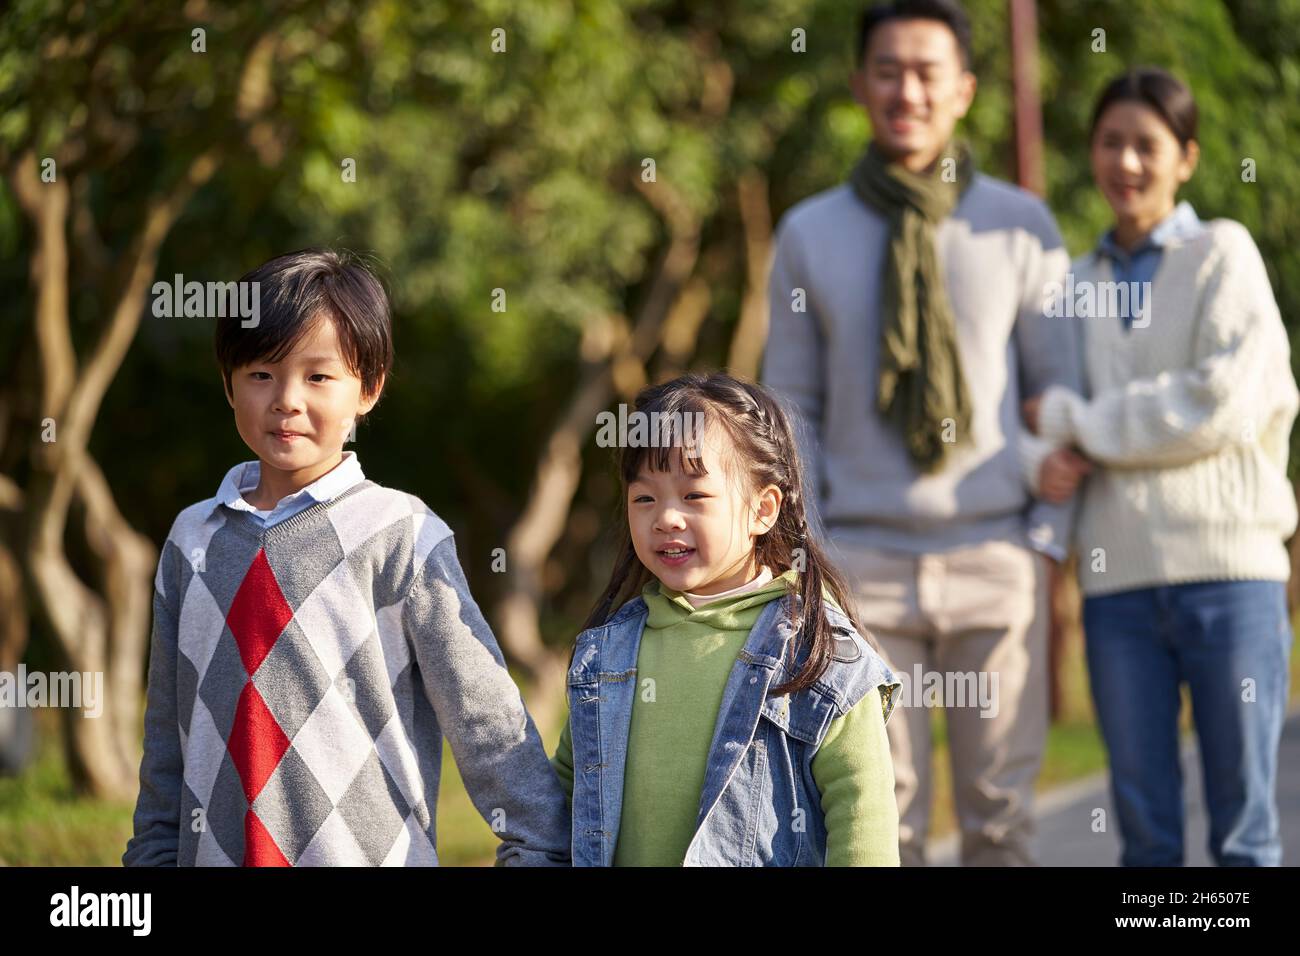 happy asian family with two children taking a walk outdoors in city park Stock Photo